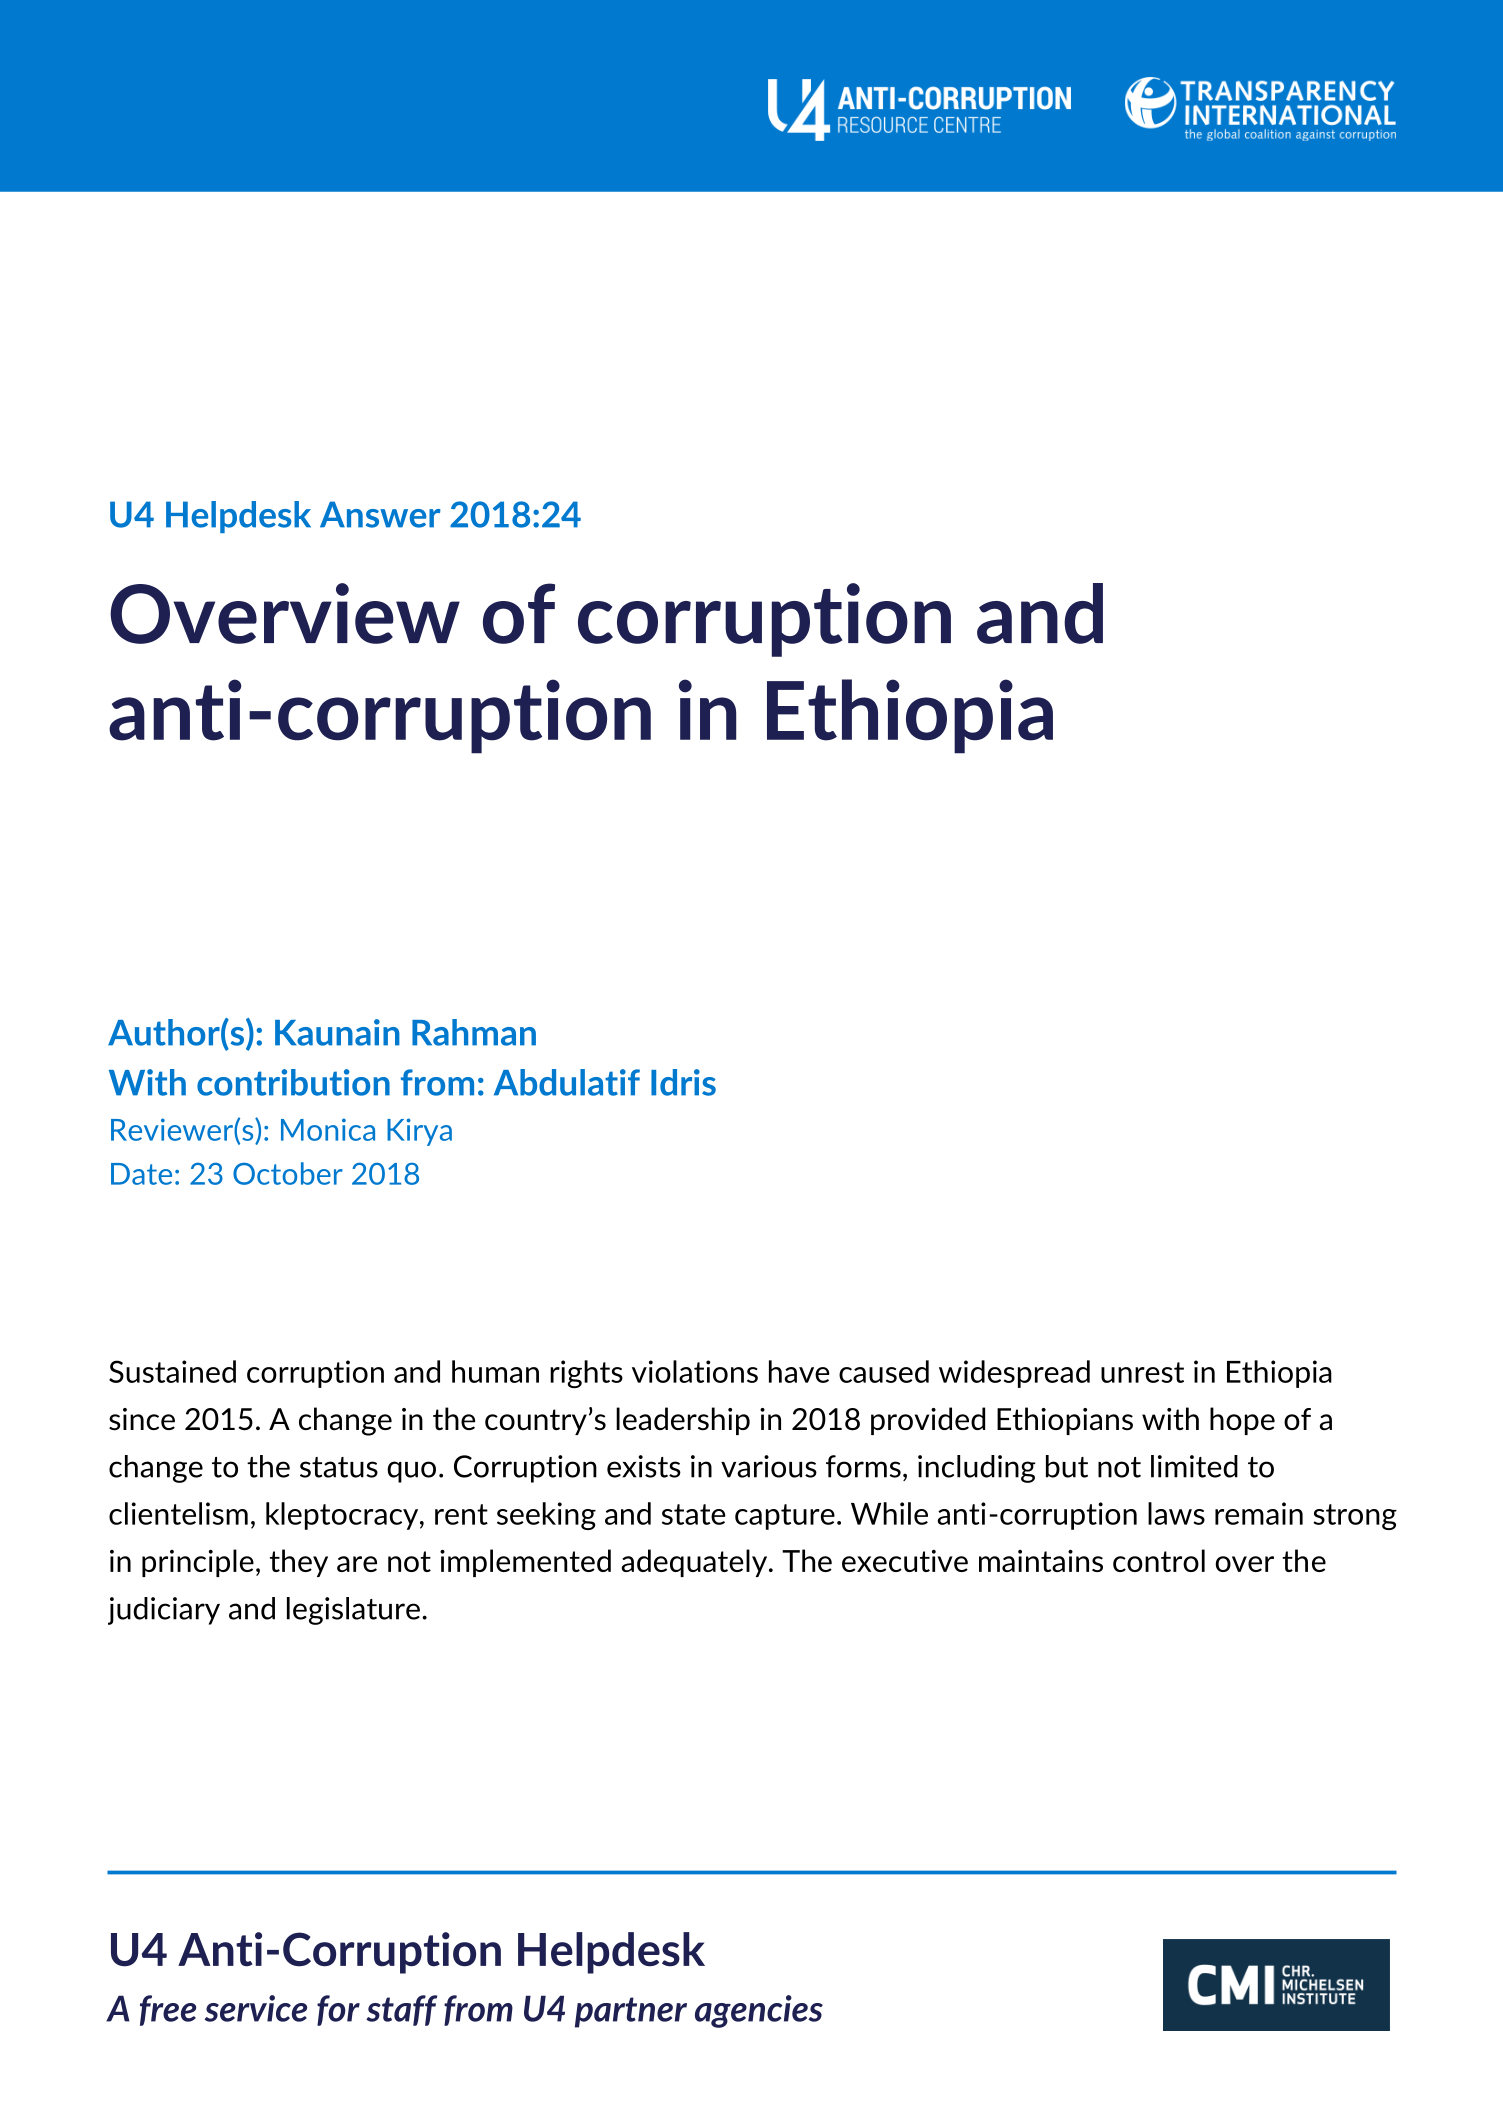 Overview of corruption and anti-corruption in Ethiopia